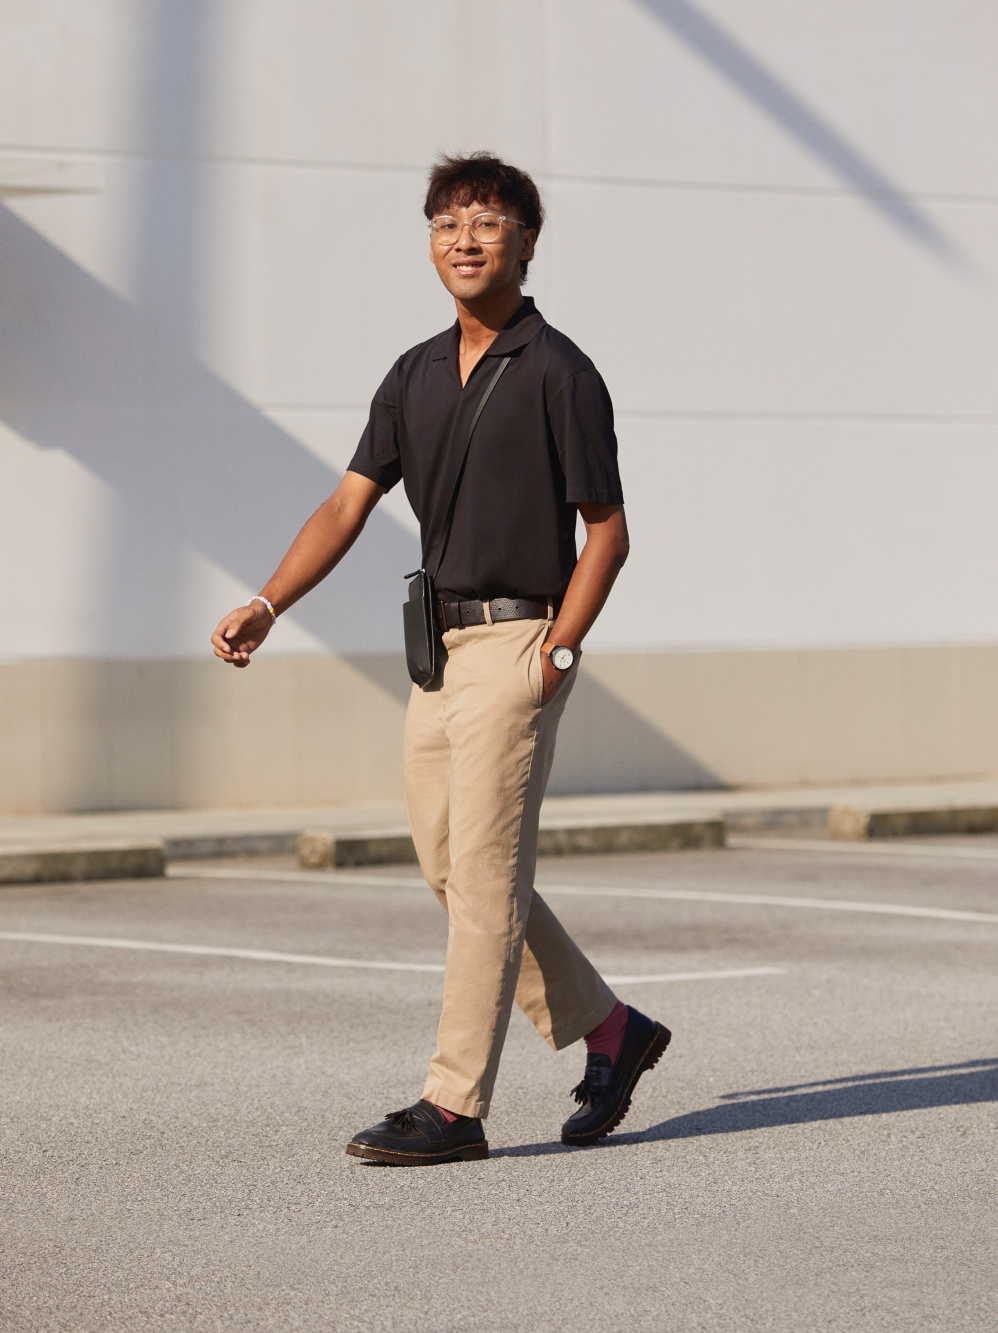 Check styling ideas for「Smart Ankle Pants (Cotton - Regular Length 64.5 -  70.5 cm)*」